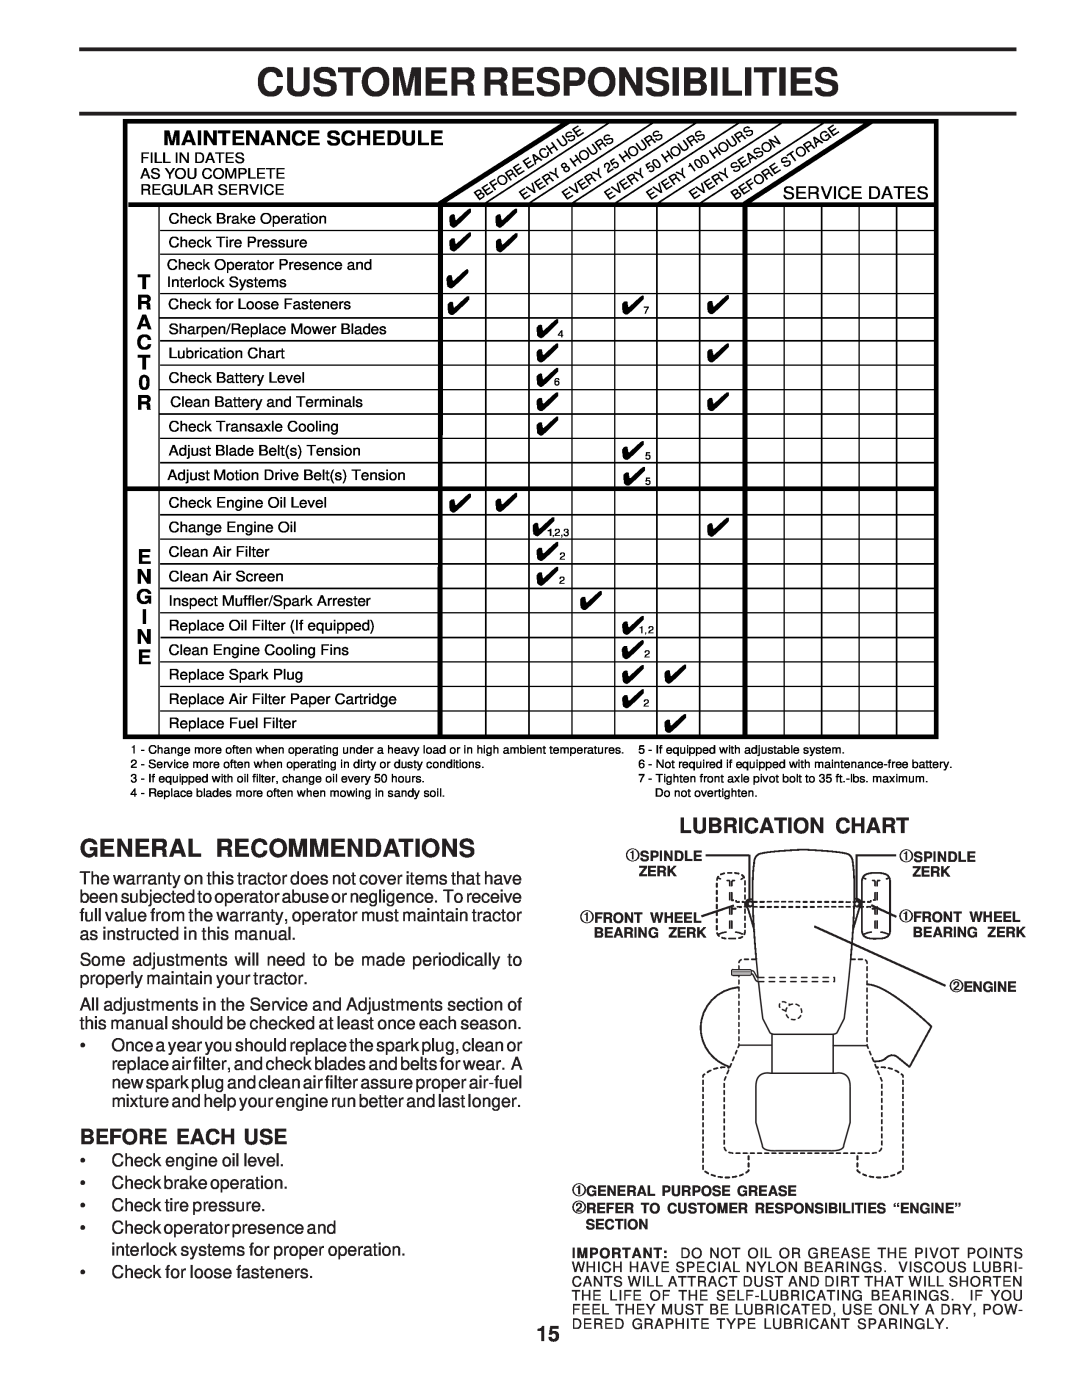 Poulan 173304, PR17H42STA Customer Responsibilities, General Recommendations, ¿Lubrication Chart, Before Each Use 